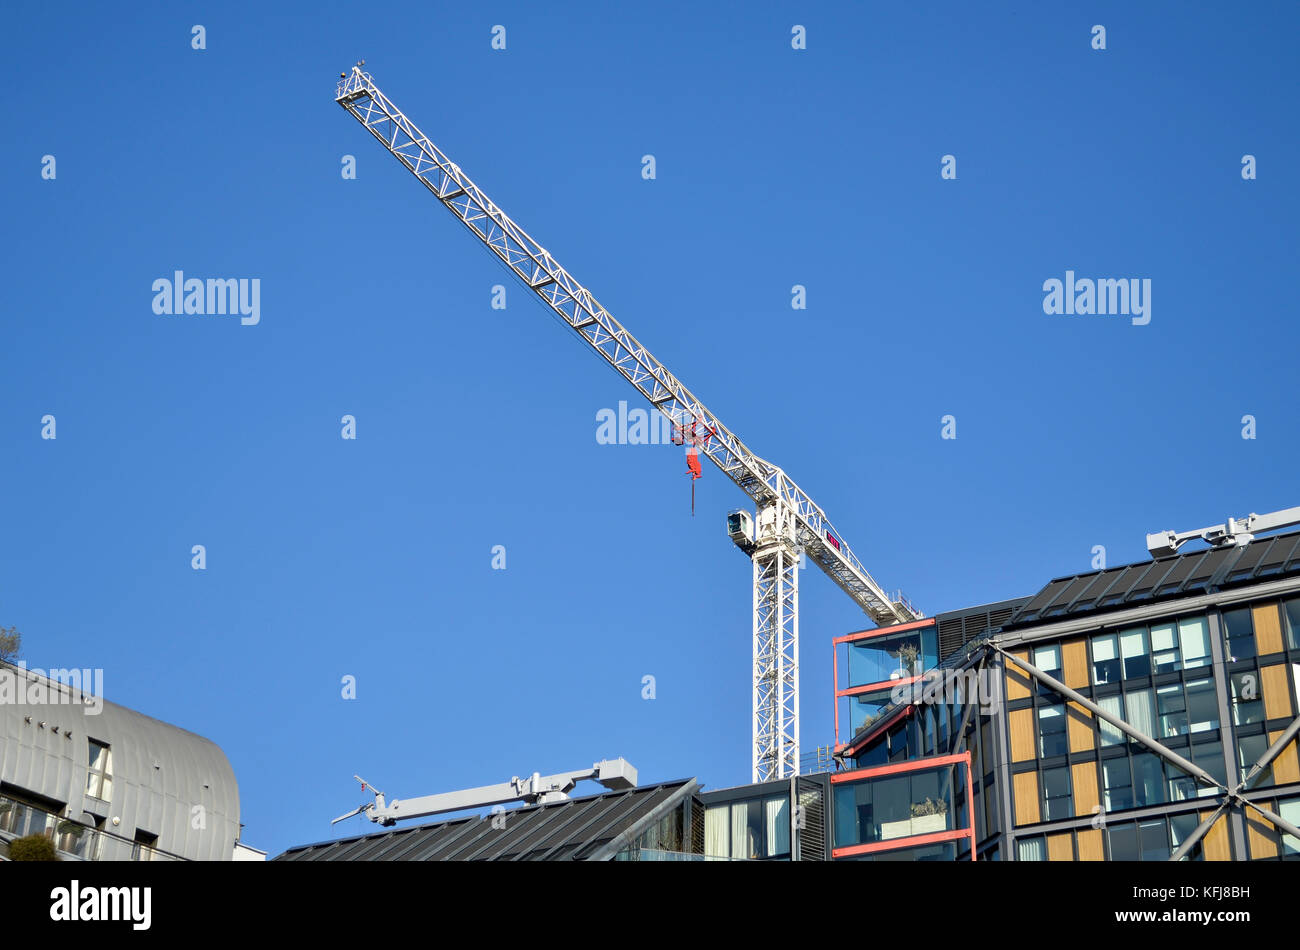 Tower crane, London, UK. Hopton Street SE1 buildings in foreground. Stock Photo